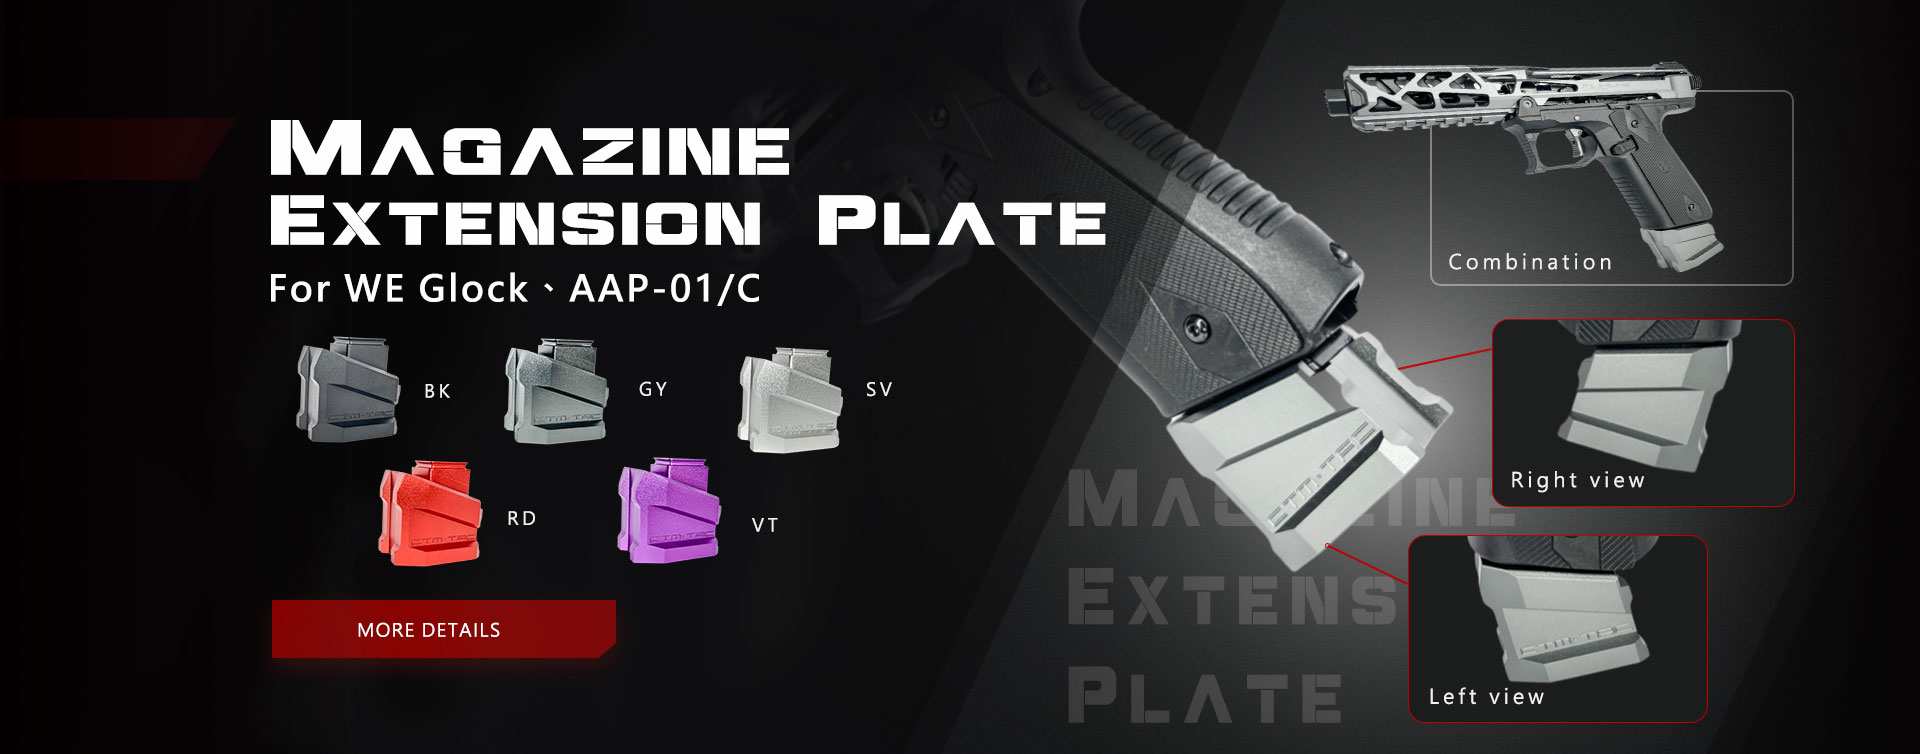 Magazine Extension Plate